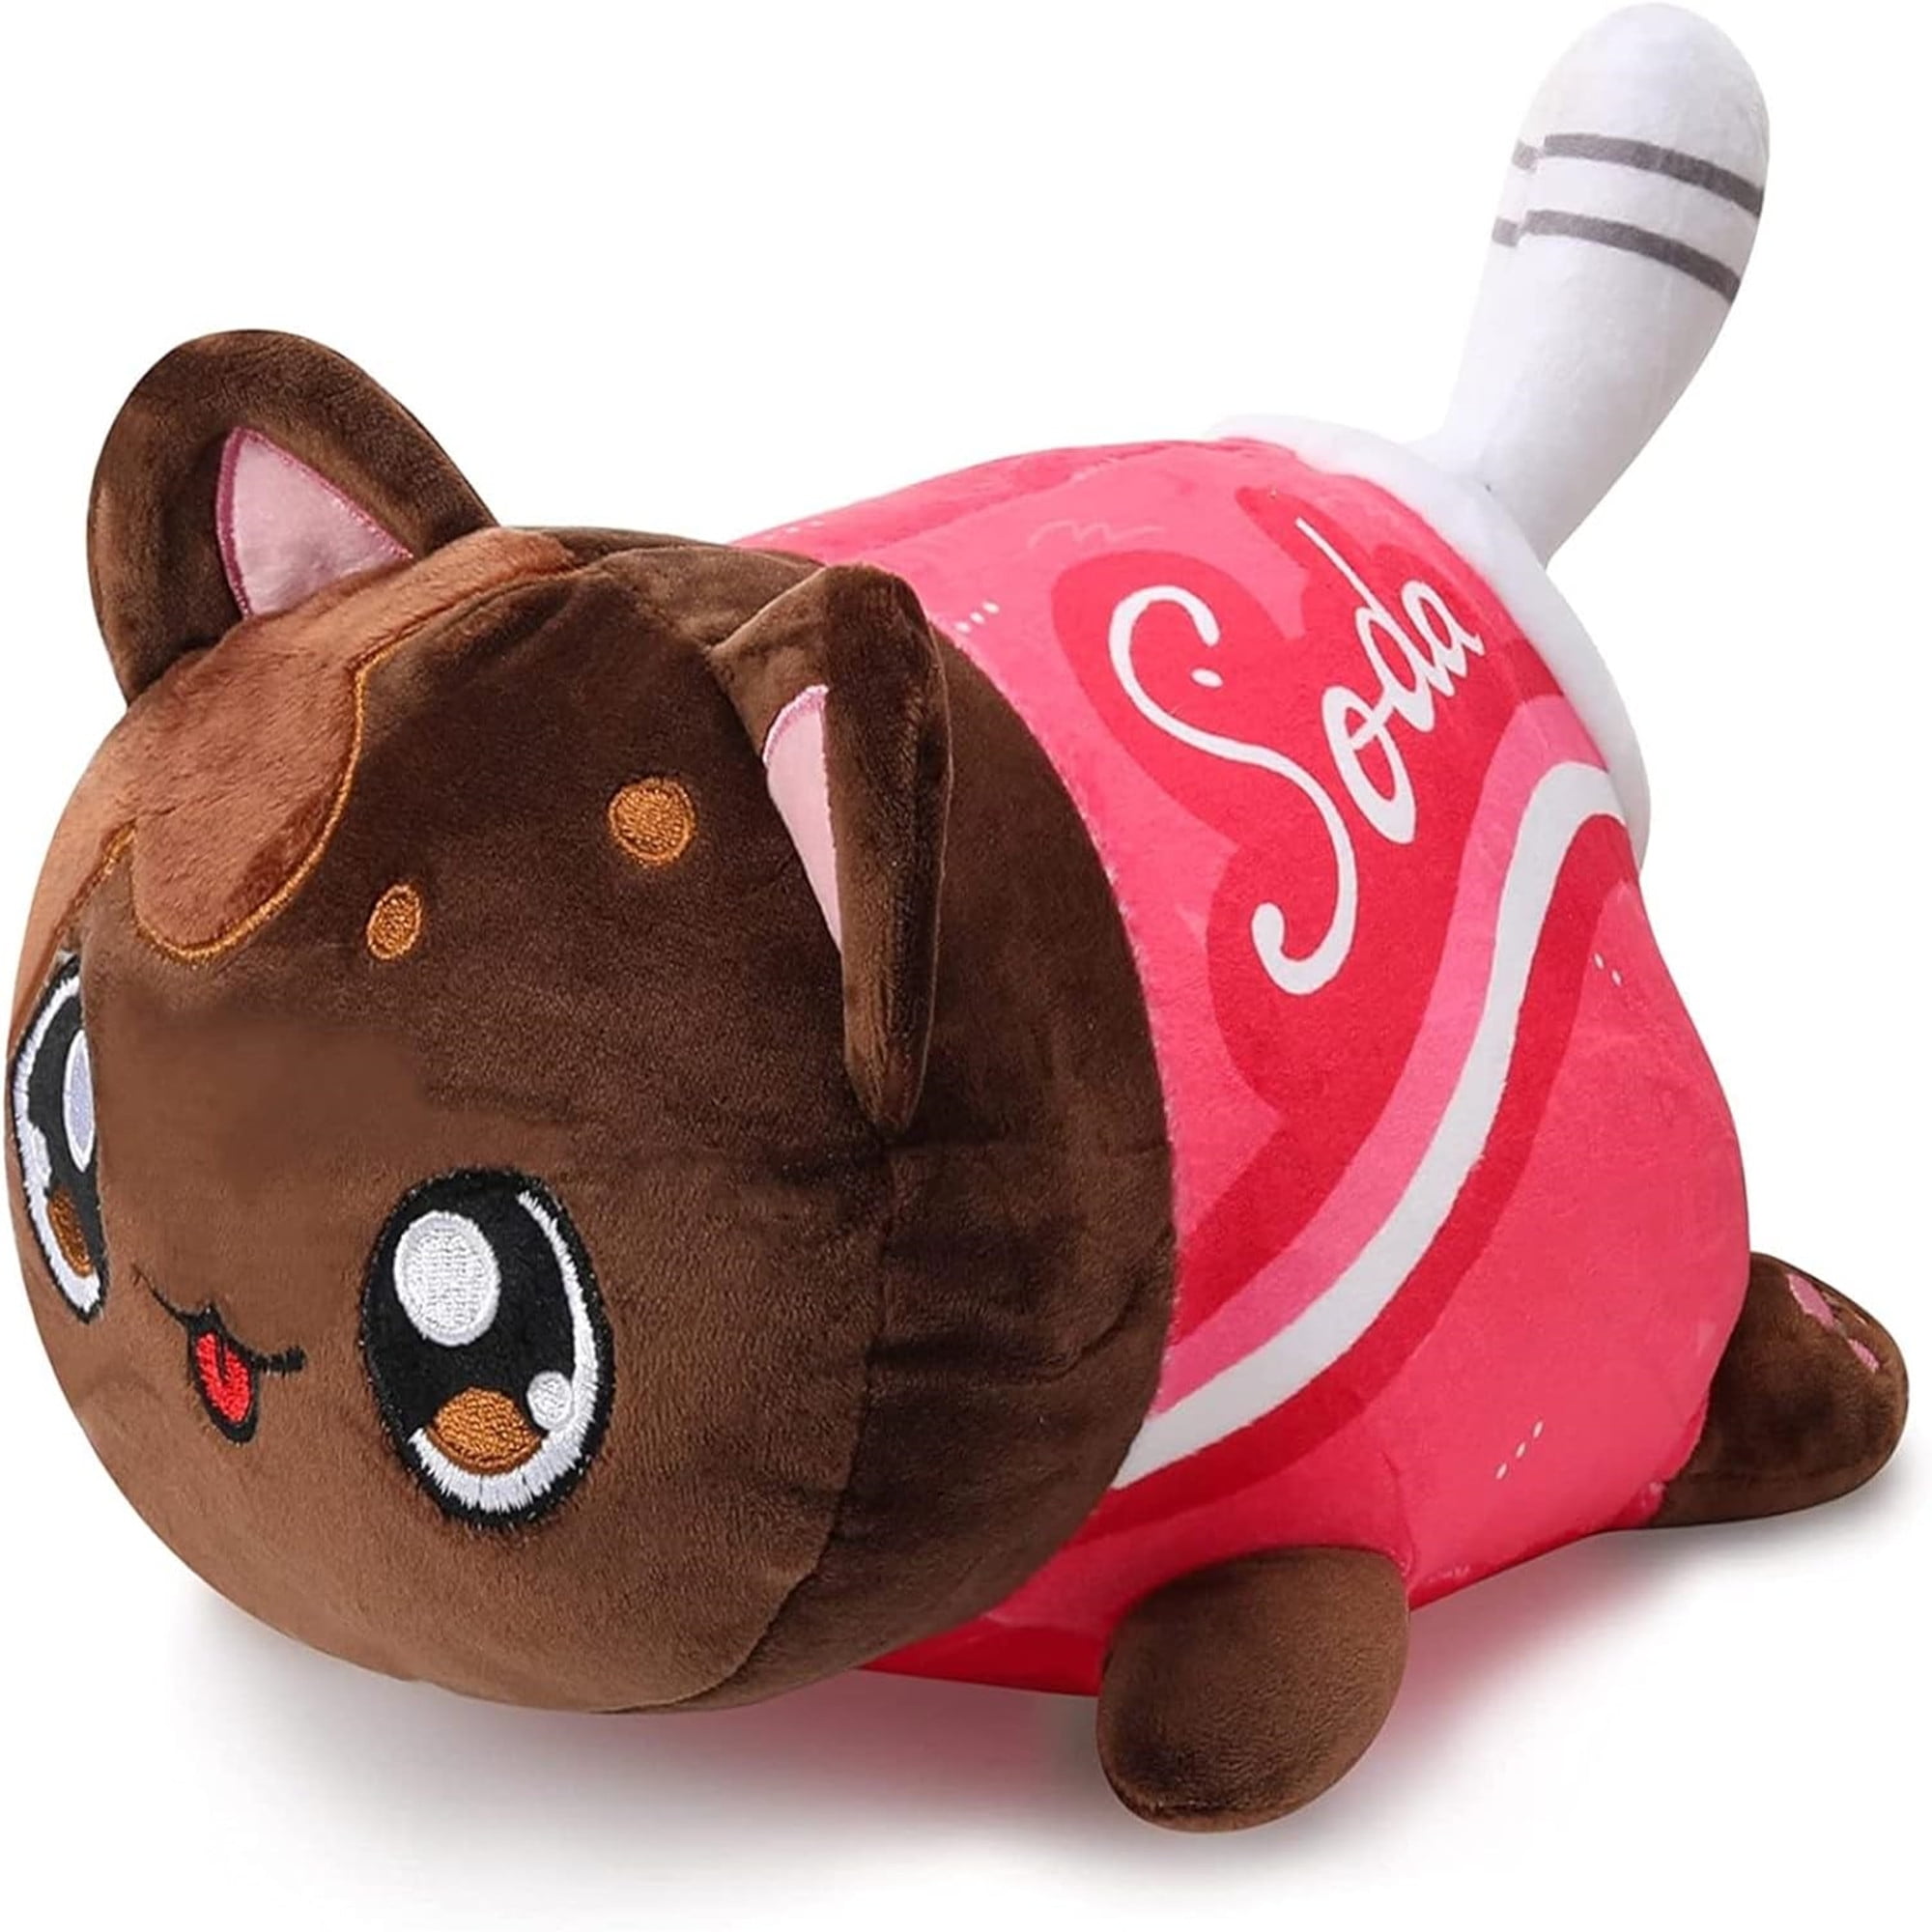 New Aphmau Plush Doll Meemeows Food Cat Plushies Cute Animal 9.8 Inches  Plush Sleeping Pillow Christmas Doll Gifts Toys For Kids